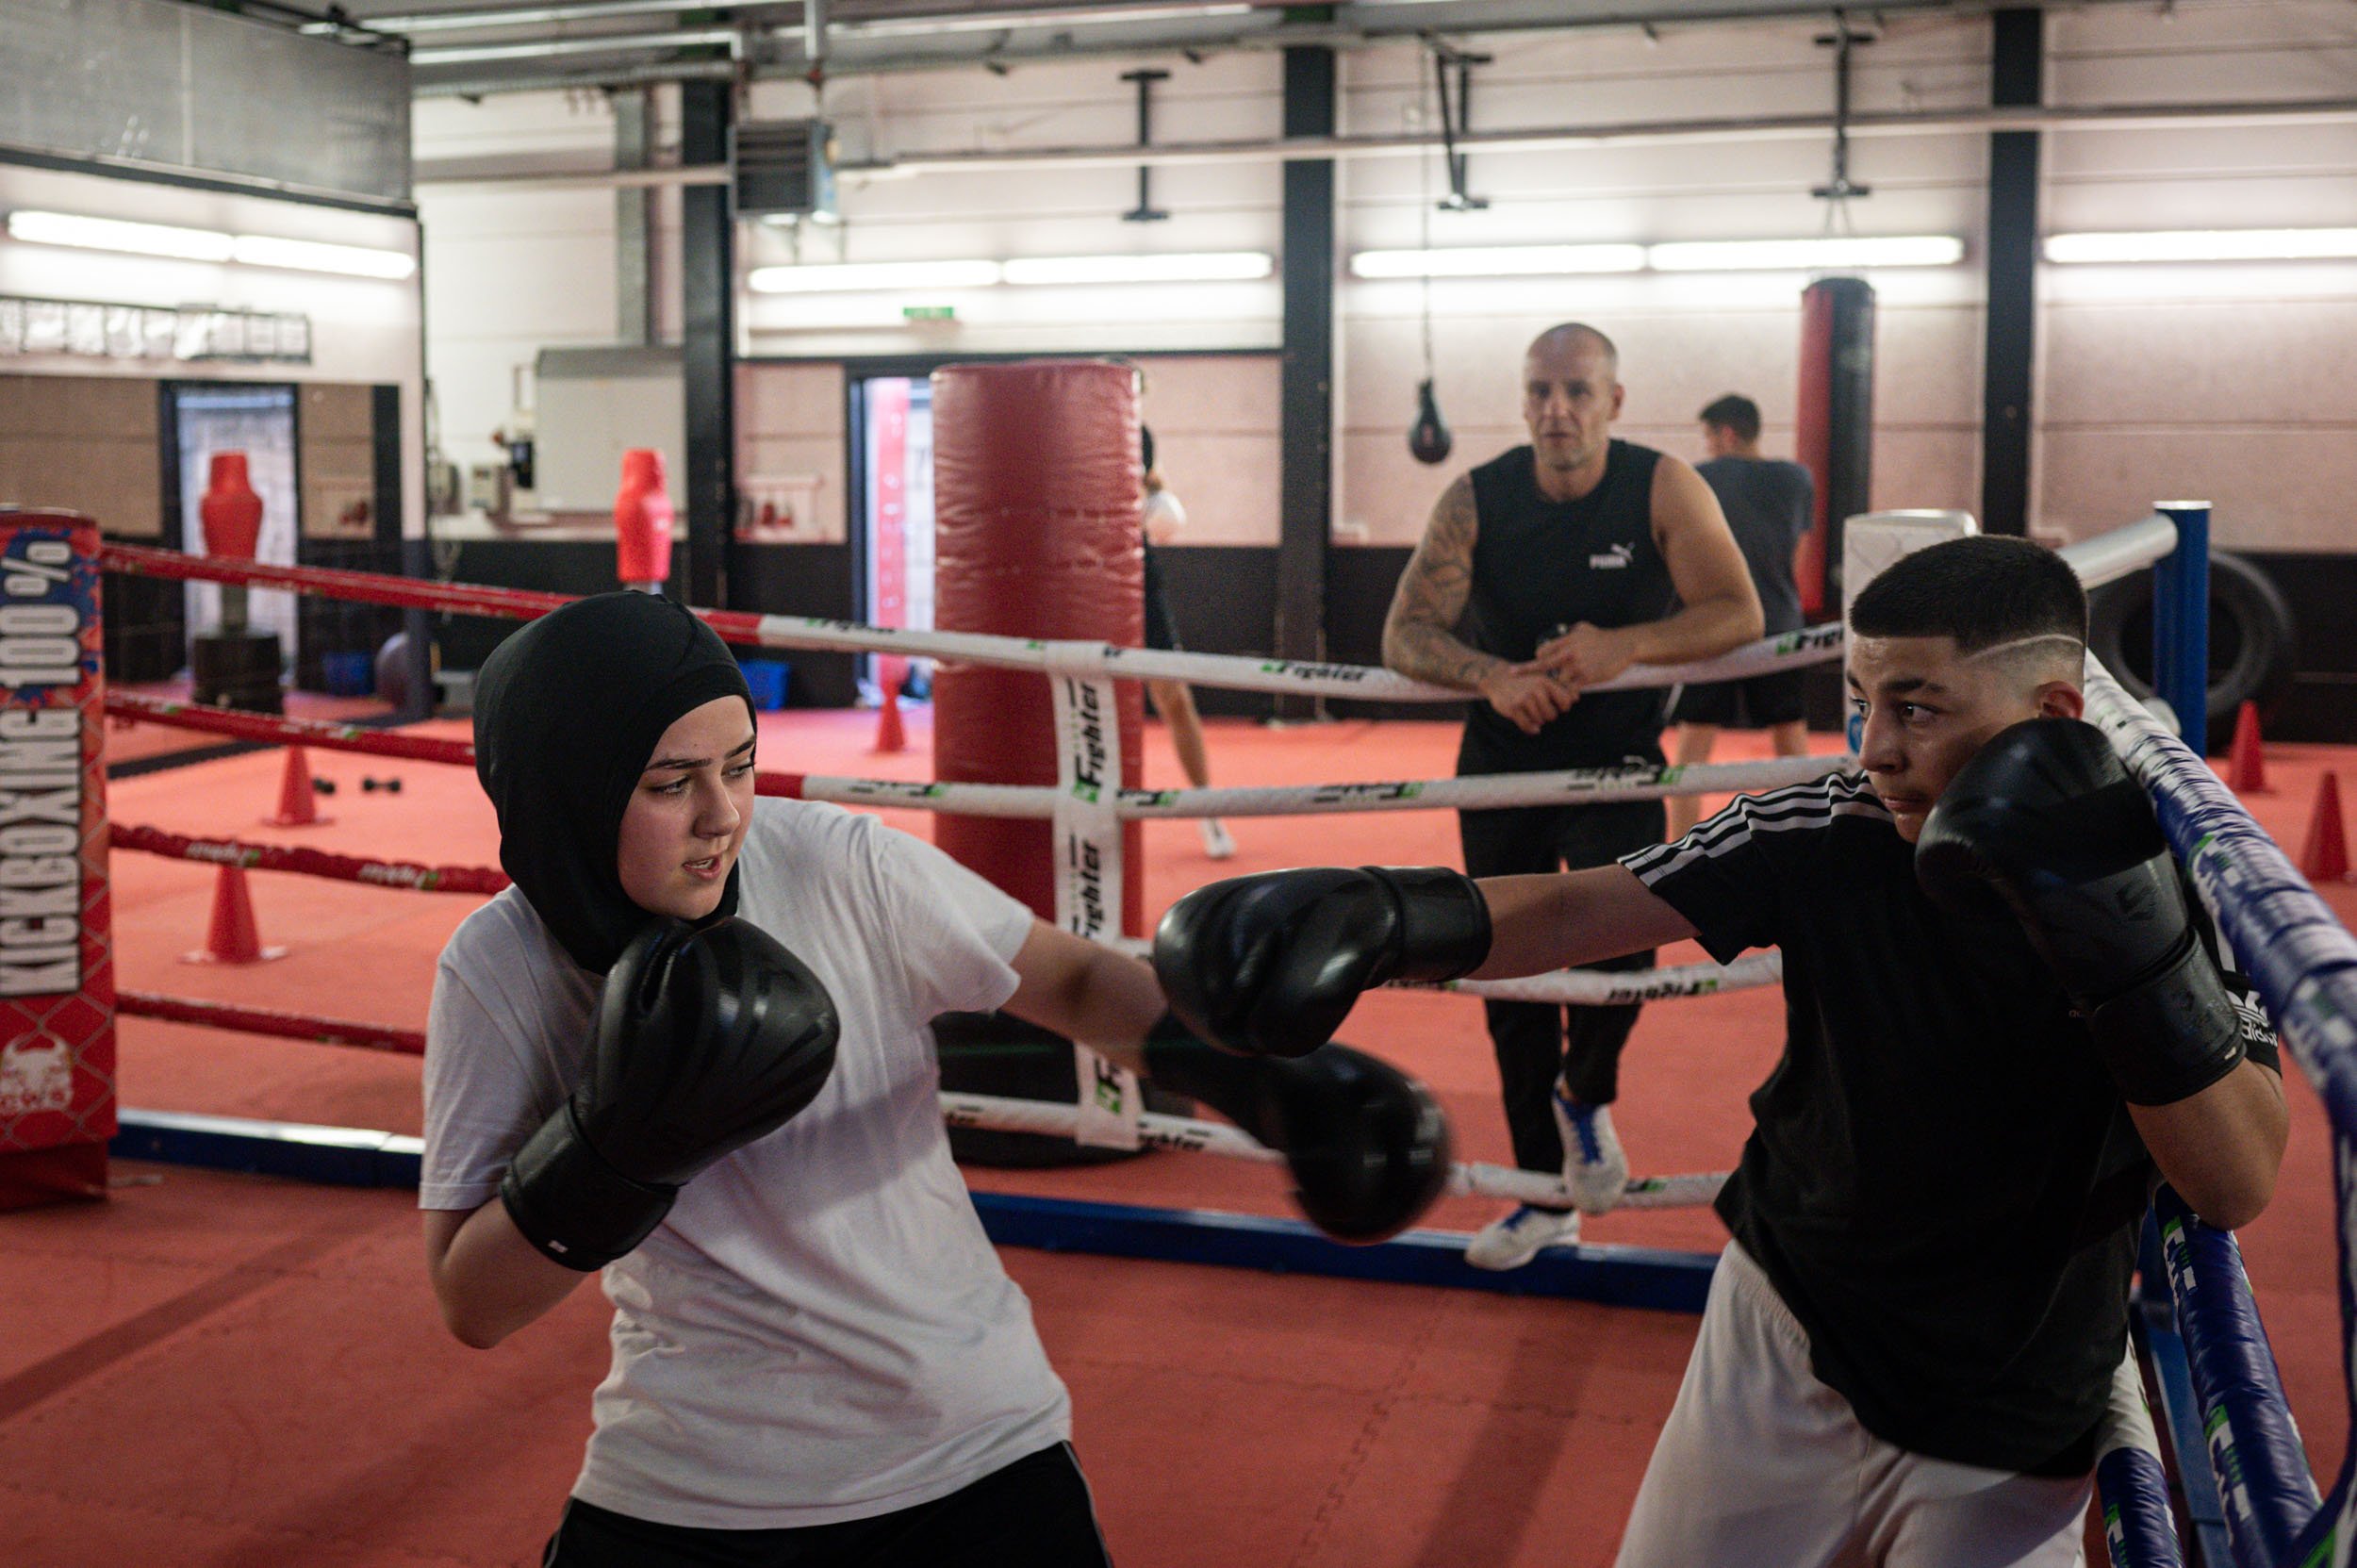  Romaissa Elbaghdadi, 15, training with Angelo Raimon, 13, at a boxing club in Offenbach. 